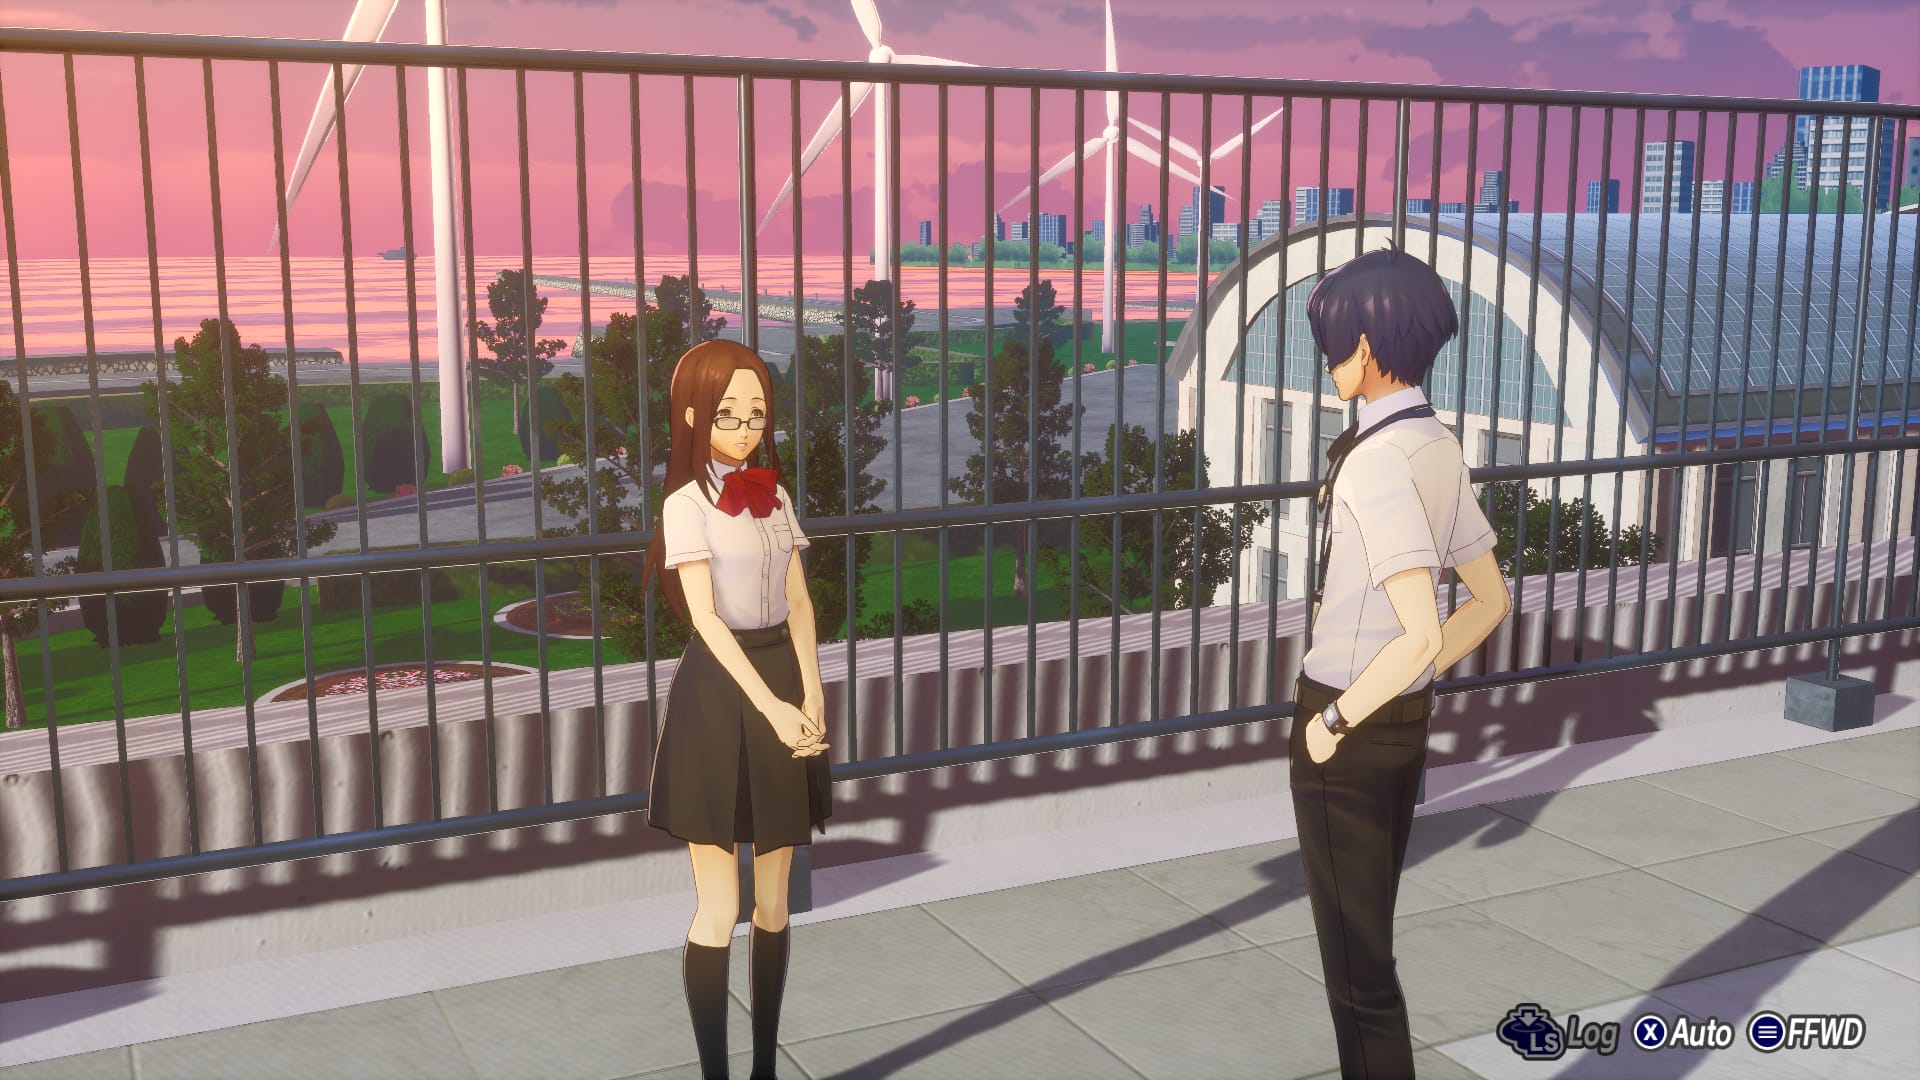 Persona 3 Reload screenshot of Chihiro and the protagonist standing on the school rooftop.